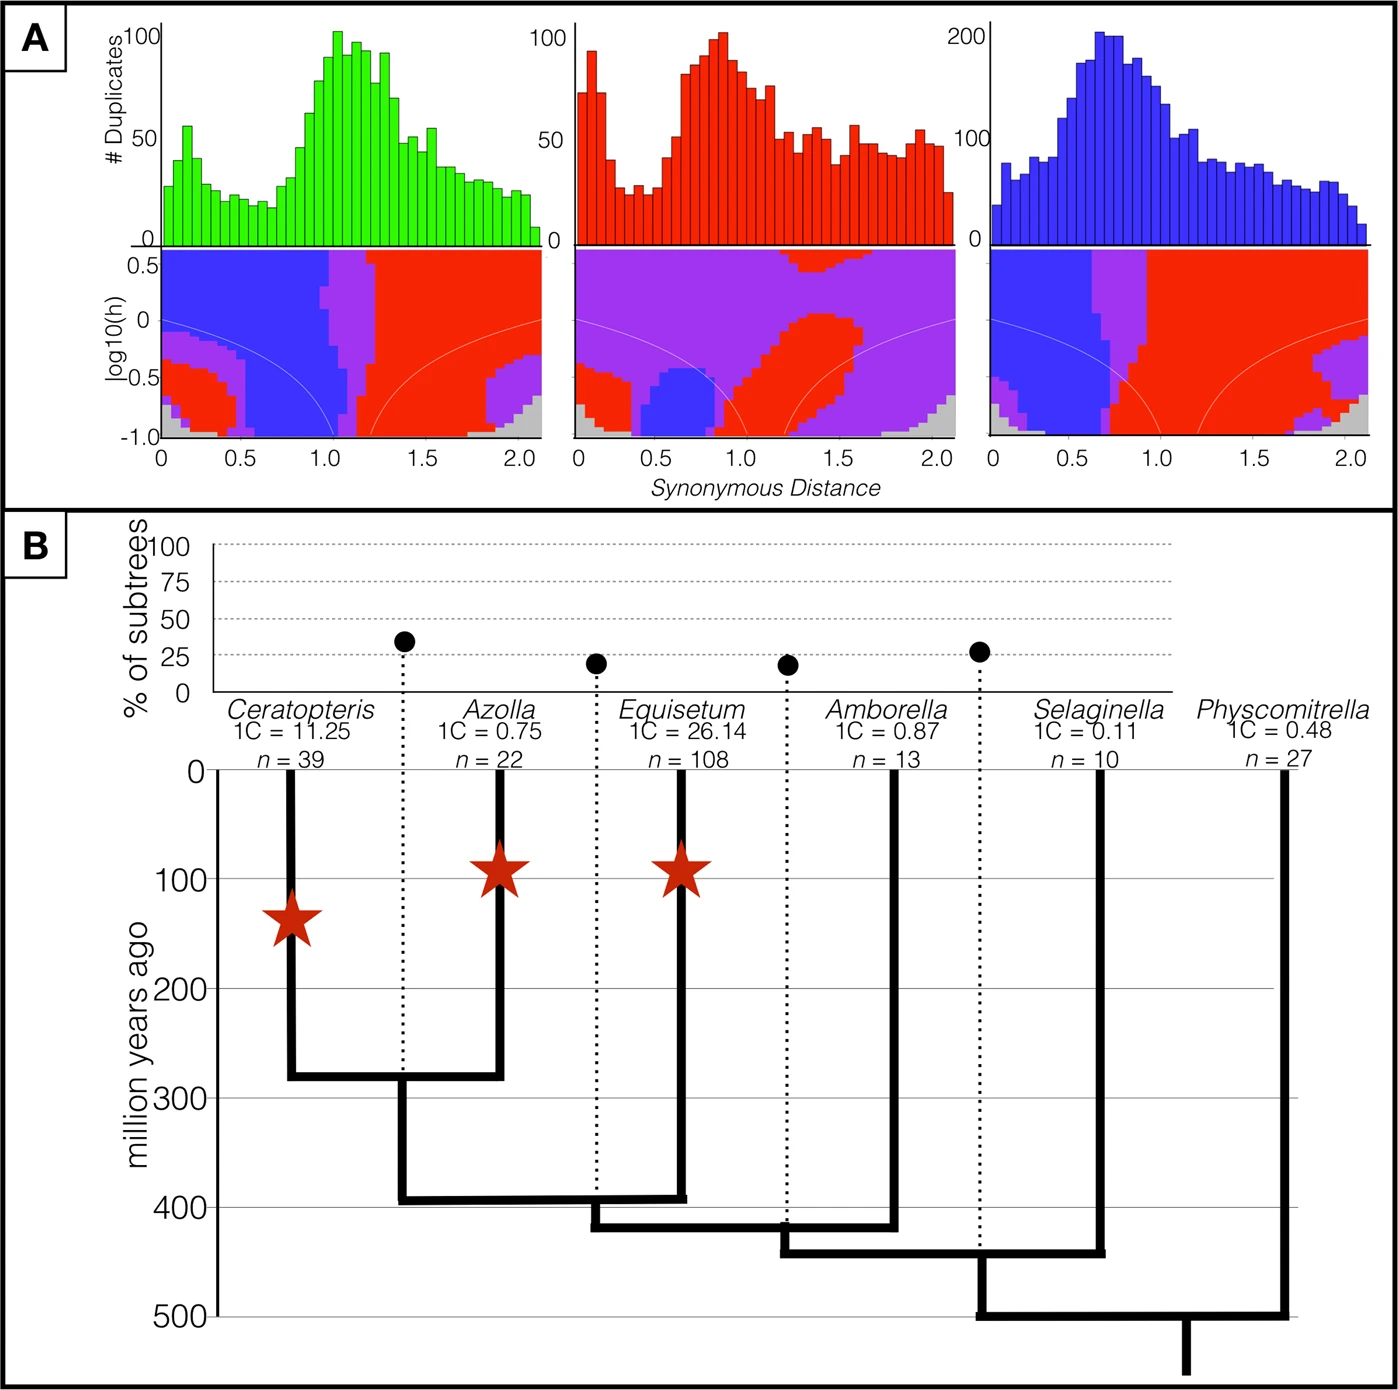 Polyploidy analyses of three fern species. (A) Paralog-age distribution analyses and associated SiZER plots of three fern species. Upper panels are Ks-based histograms (0.05 bins) of paralogs in Ceratopteris richardii, Azolla filiculoides, and Equisetum giganteum. Lower panels are SiZER plots of the above paralog-age distribution data and associated smoothing functions where blue indicates significant (α = 0.05) increases, red significant decreases, purple insignificance, and gray too few data points to determine. The white lines show the effective window widths for each bandwidth. Both upper and lower panels are on the same x-axis. (B) MAPS analysis across land plants and the associated WGD events (shown as stars). The percentages of subtrees that contain gene duplications shared by the descendent species of a given node are above the phylogeny (connected by dotted lines). Dates are based on Testo and Sundue70 and Morris et al.67.